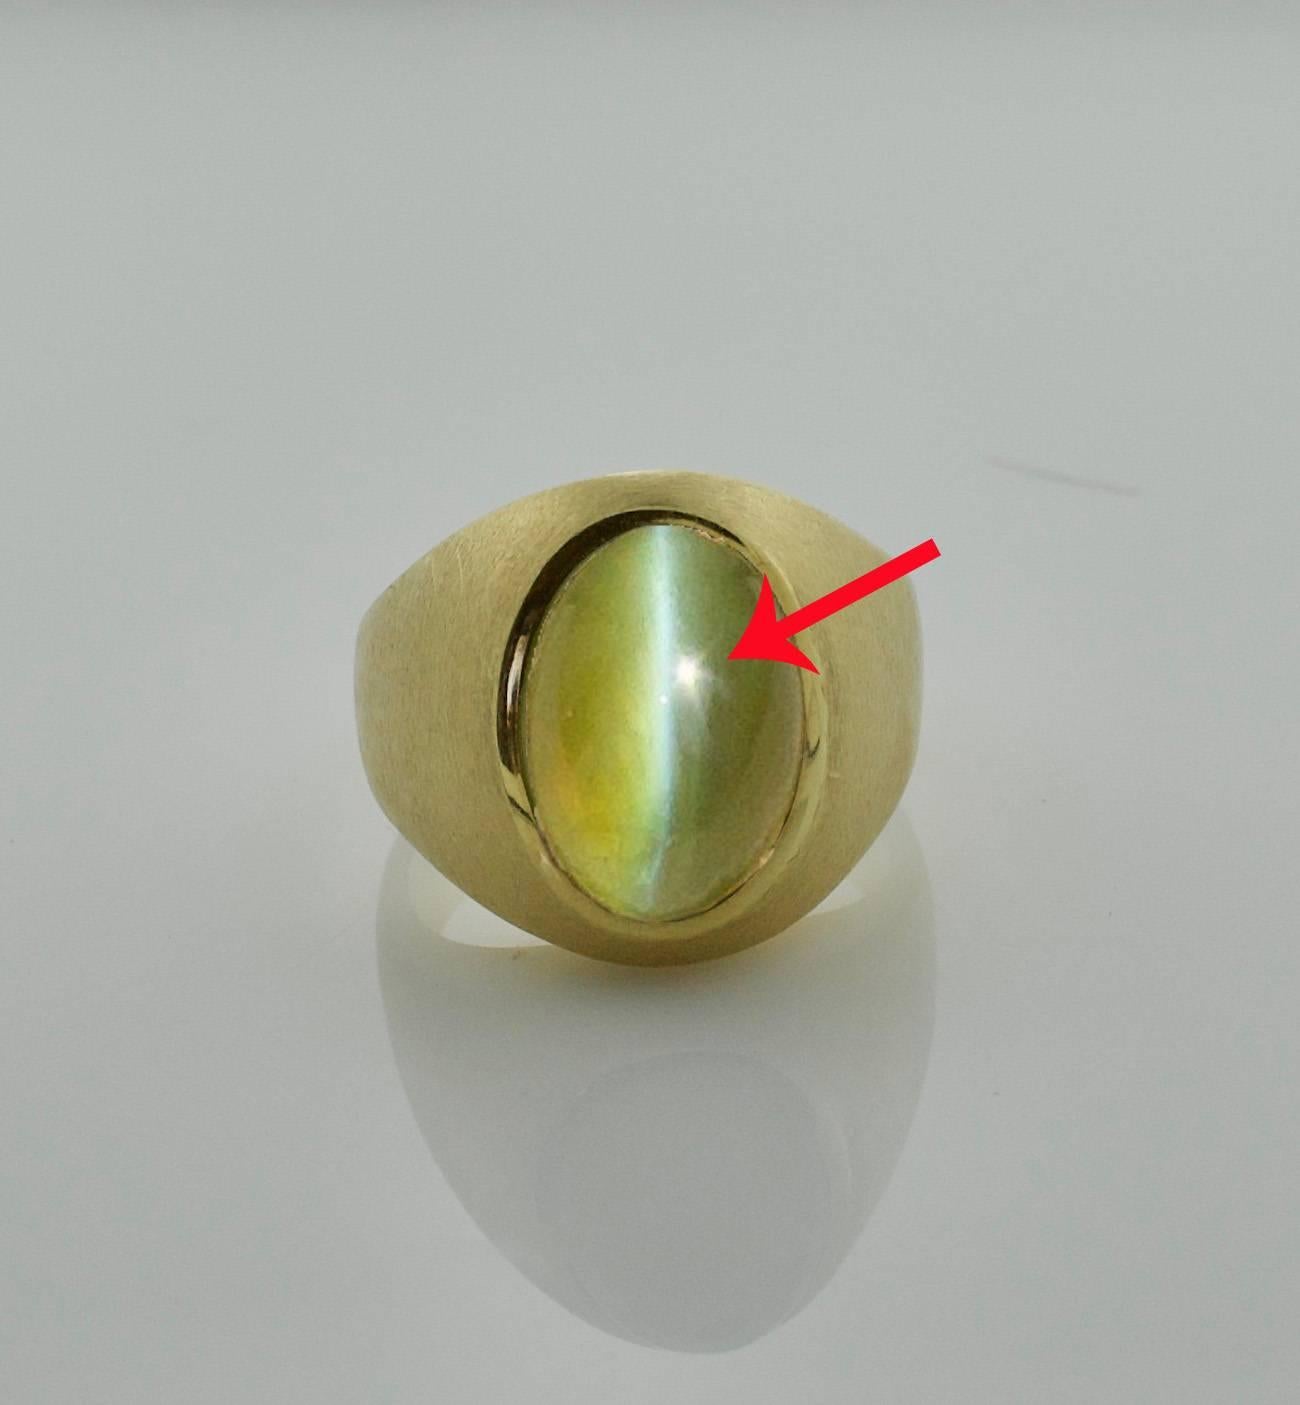 Chrysoberyl Catseye in 18k Yellow Gold Substantial Ring 
Weighing 14.71 Translucent Honey Colored with a Well Defined Eye
The Pictures are of The Actual Eye.  The Red Arrow points to  a Reflection of The Sun.  It' s NOT in The Stone or an